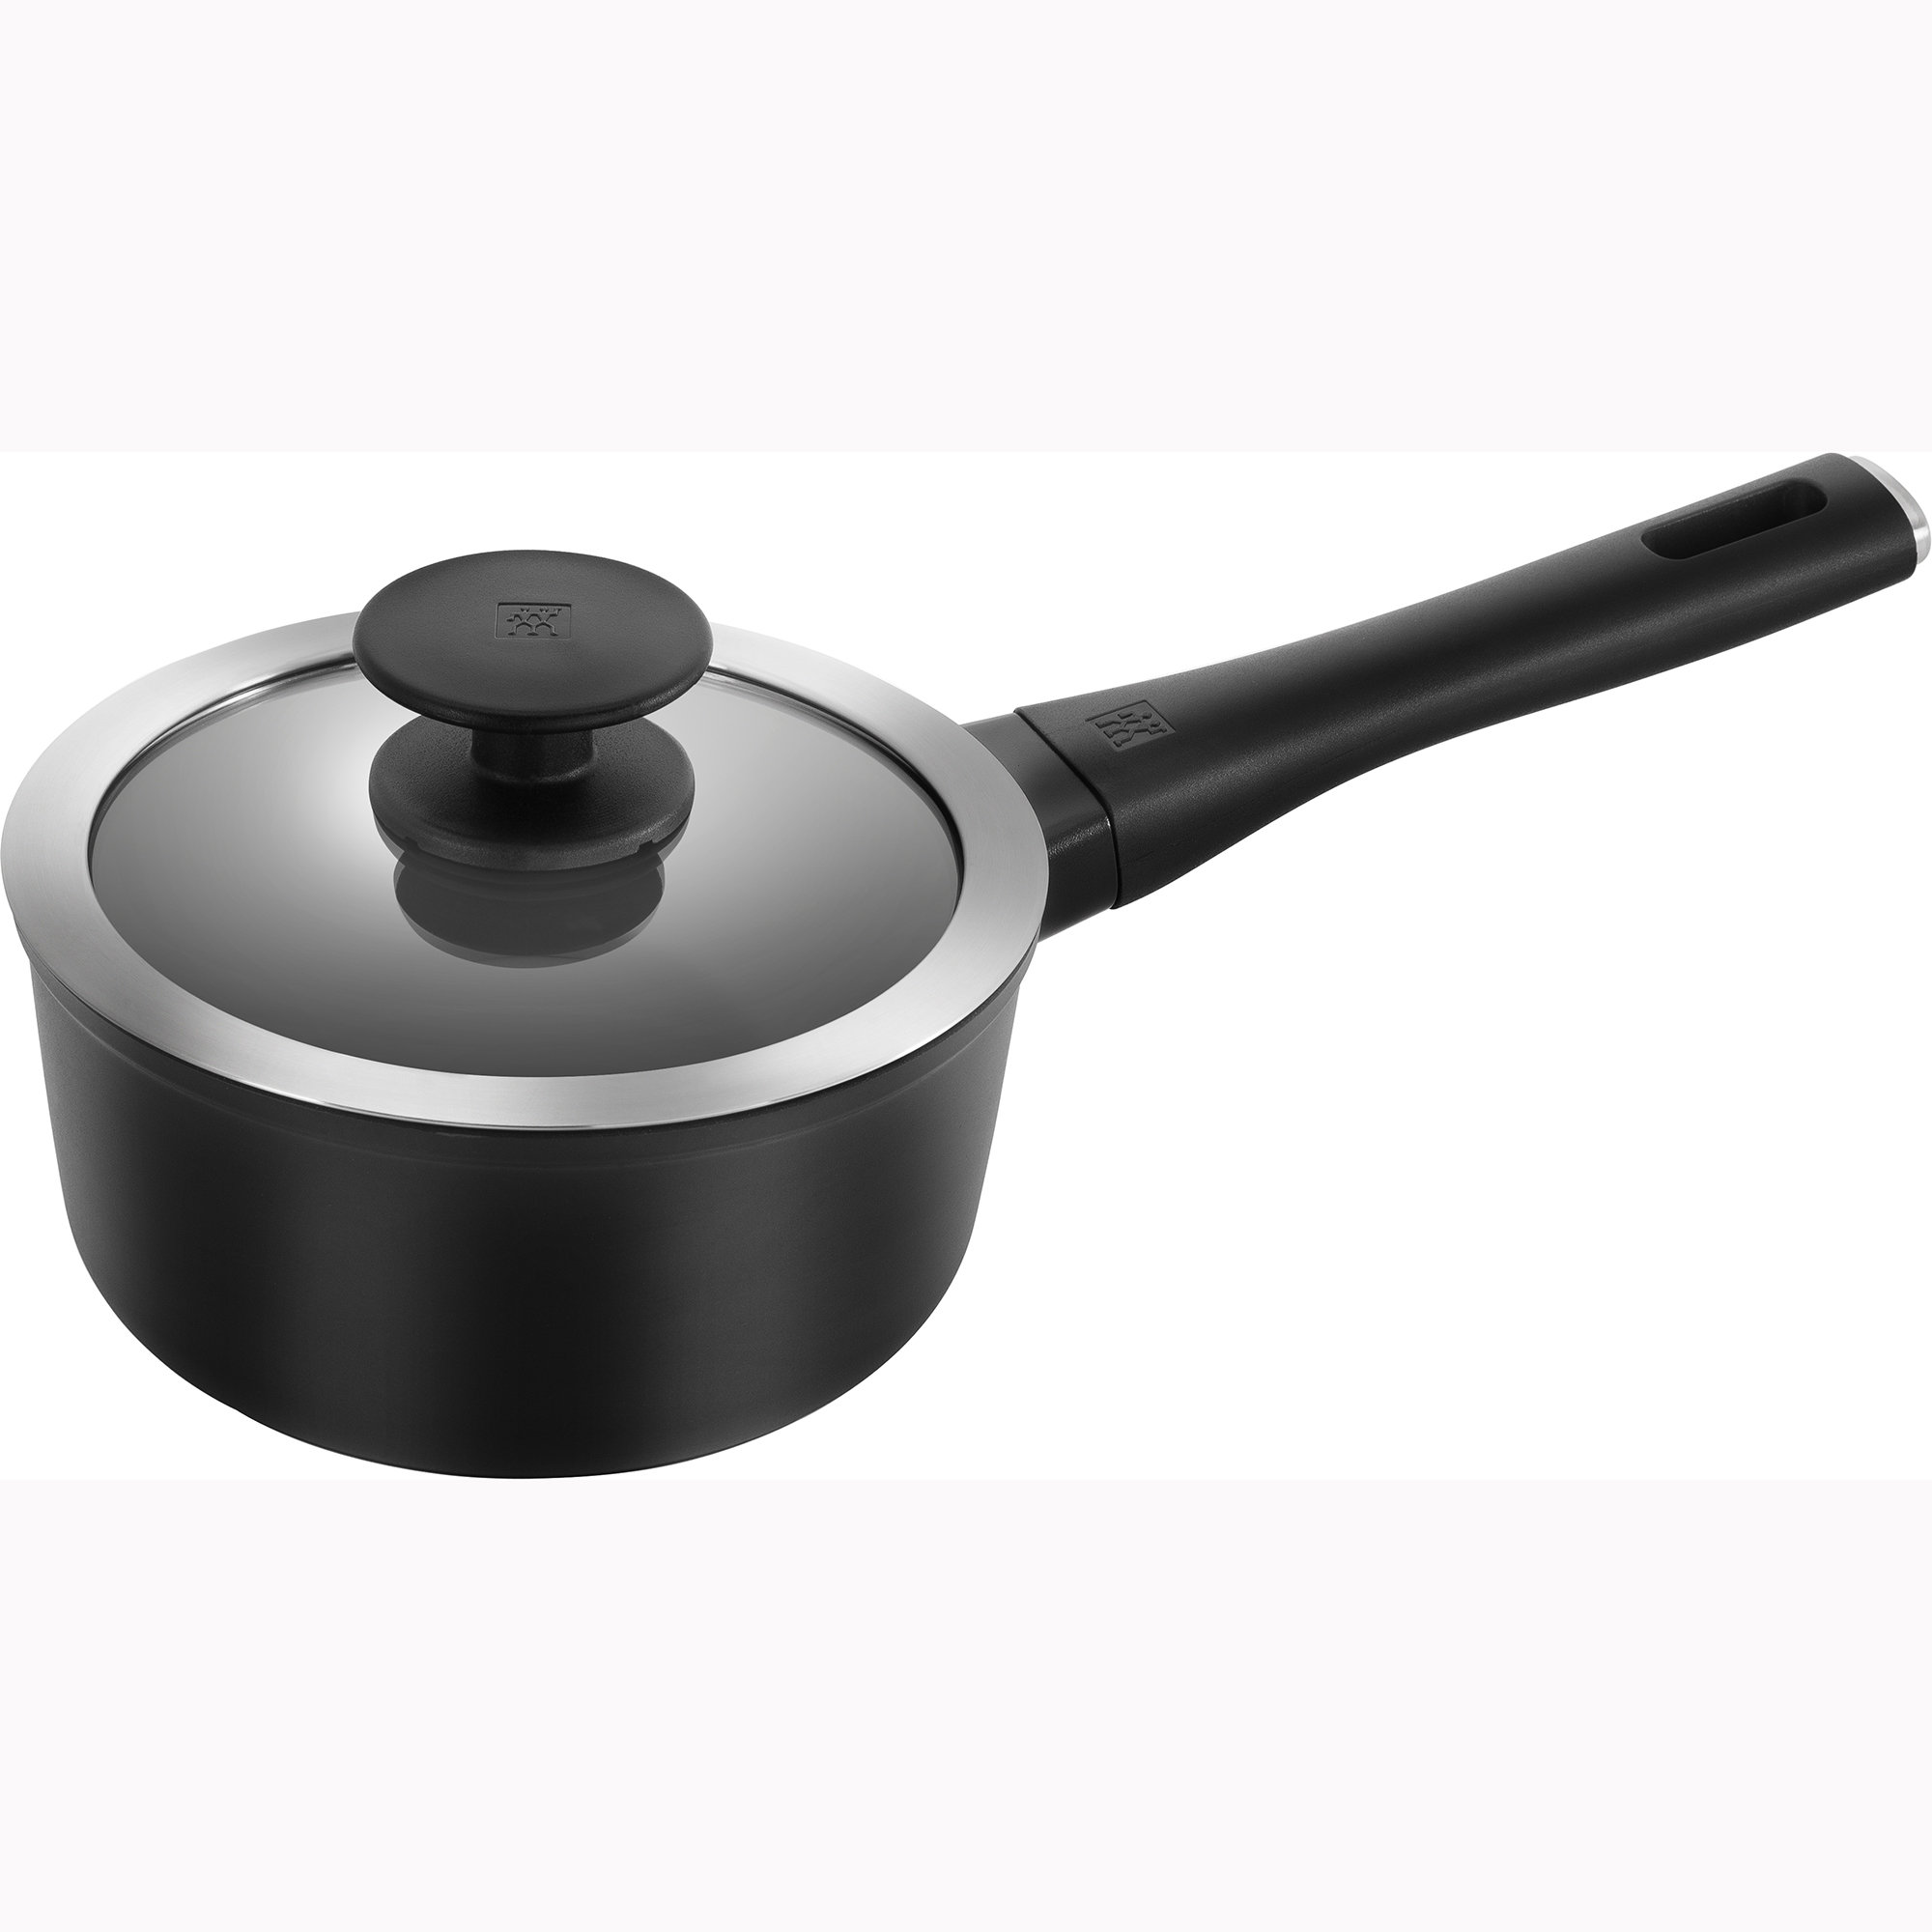 ZWILLING Madura Plus Forged 11 Nonstick Fry Pan 